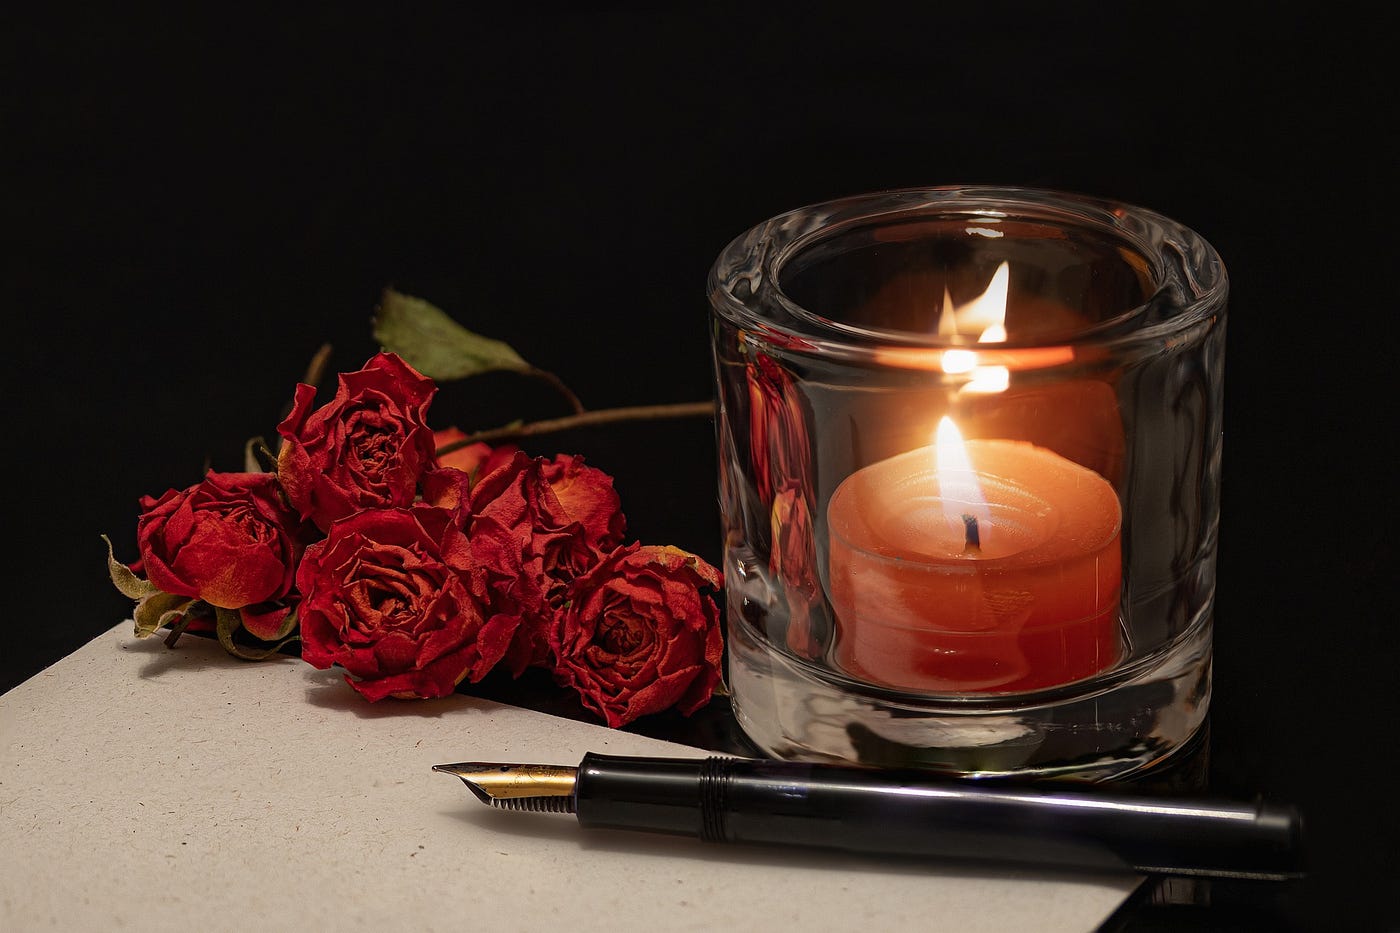 A burning candle within a glass holder, next to a fountain pen and dried roses.